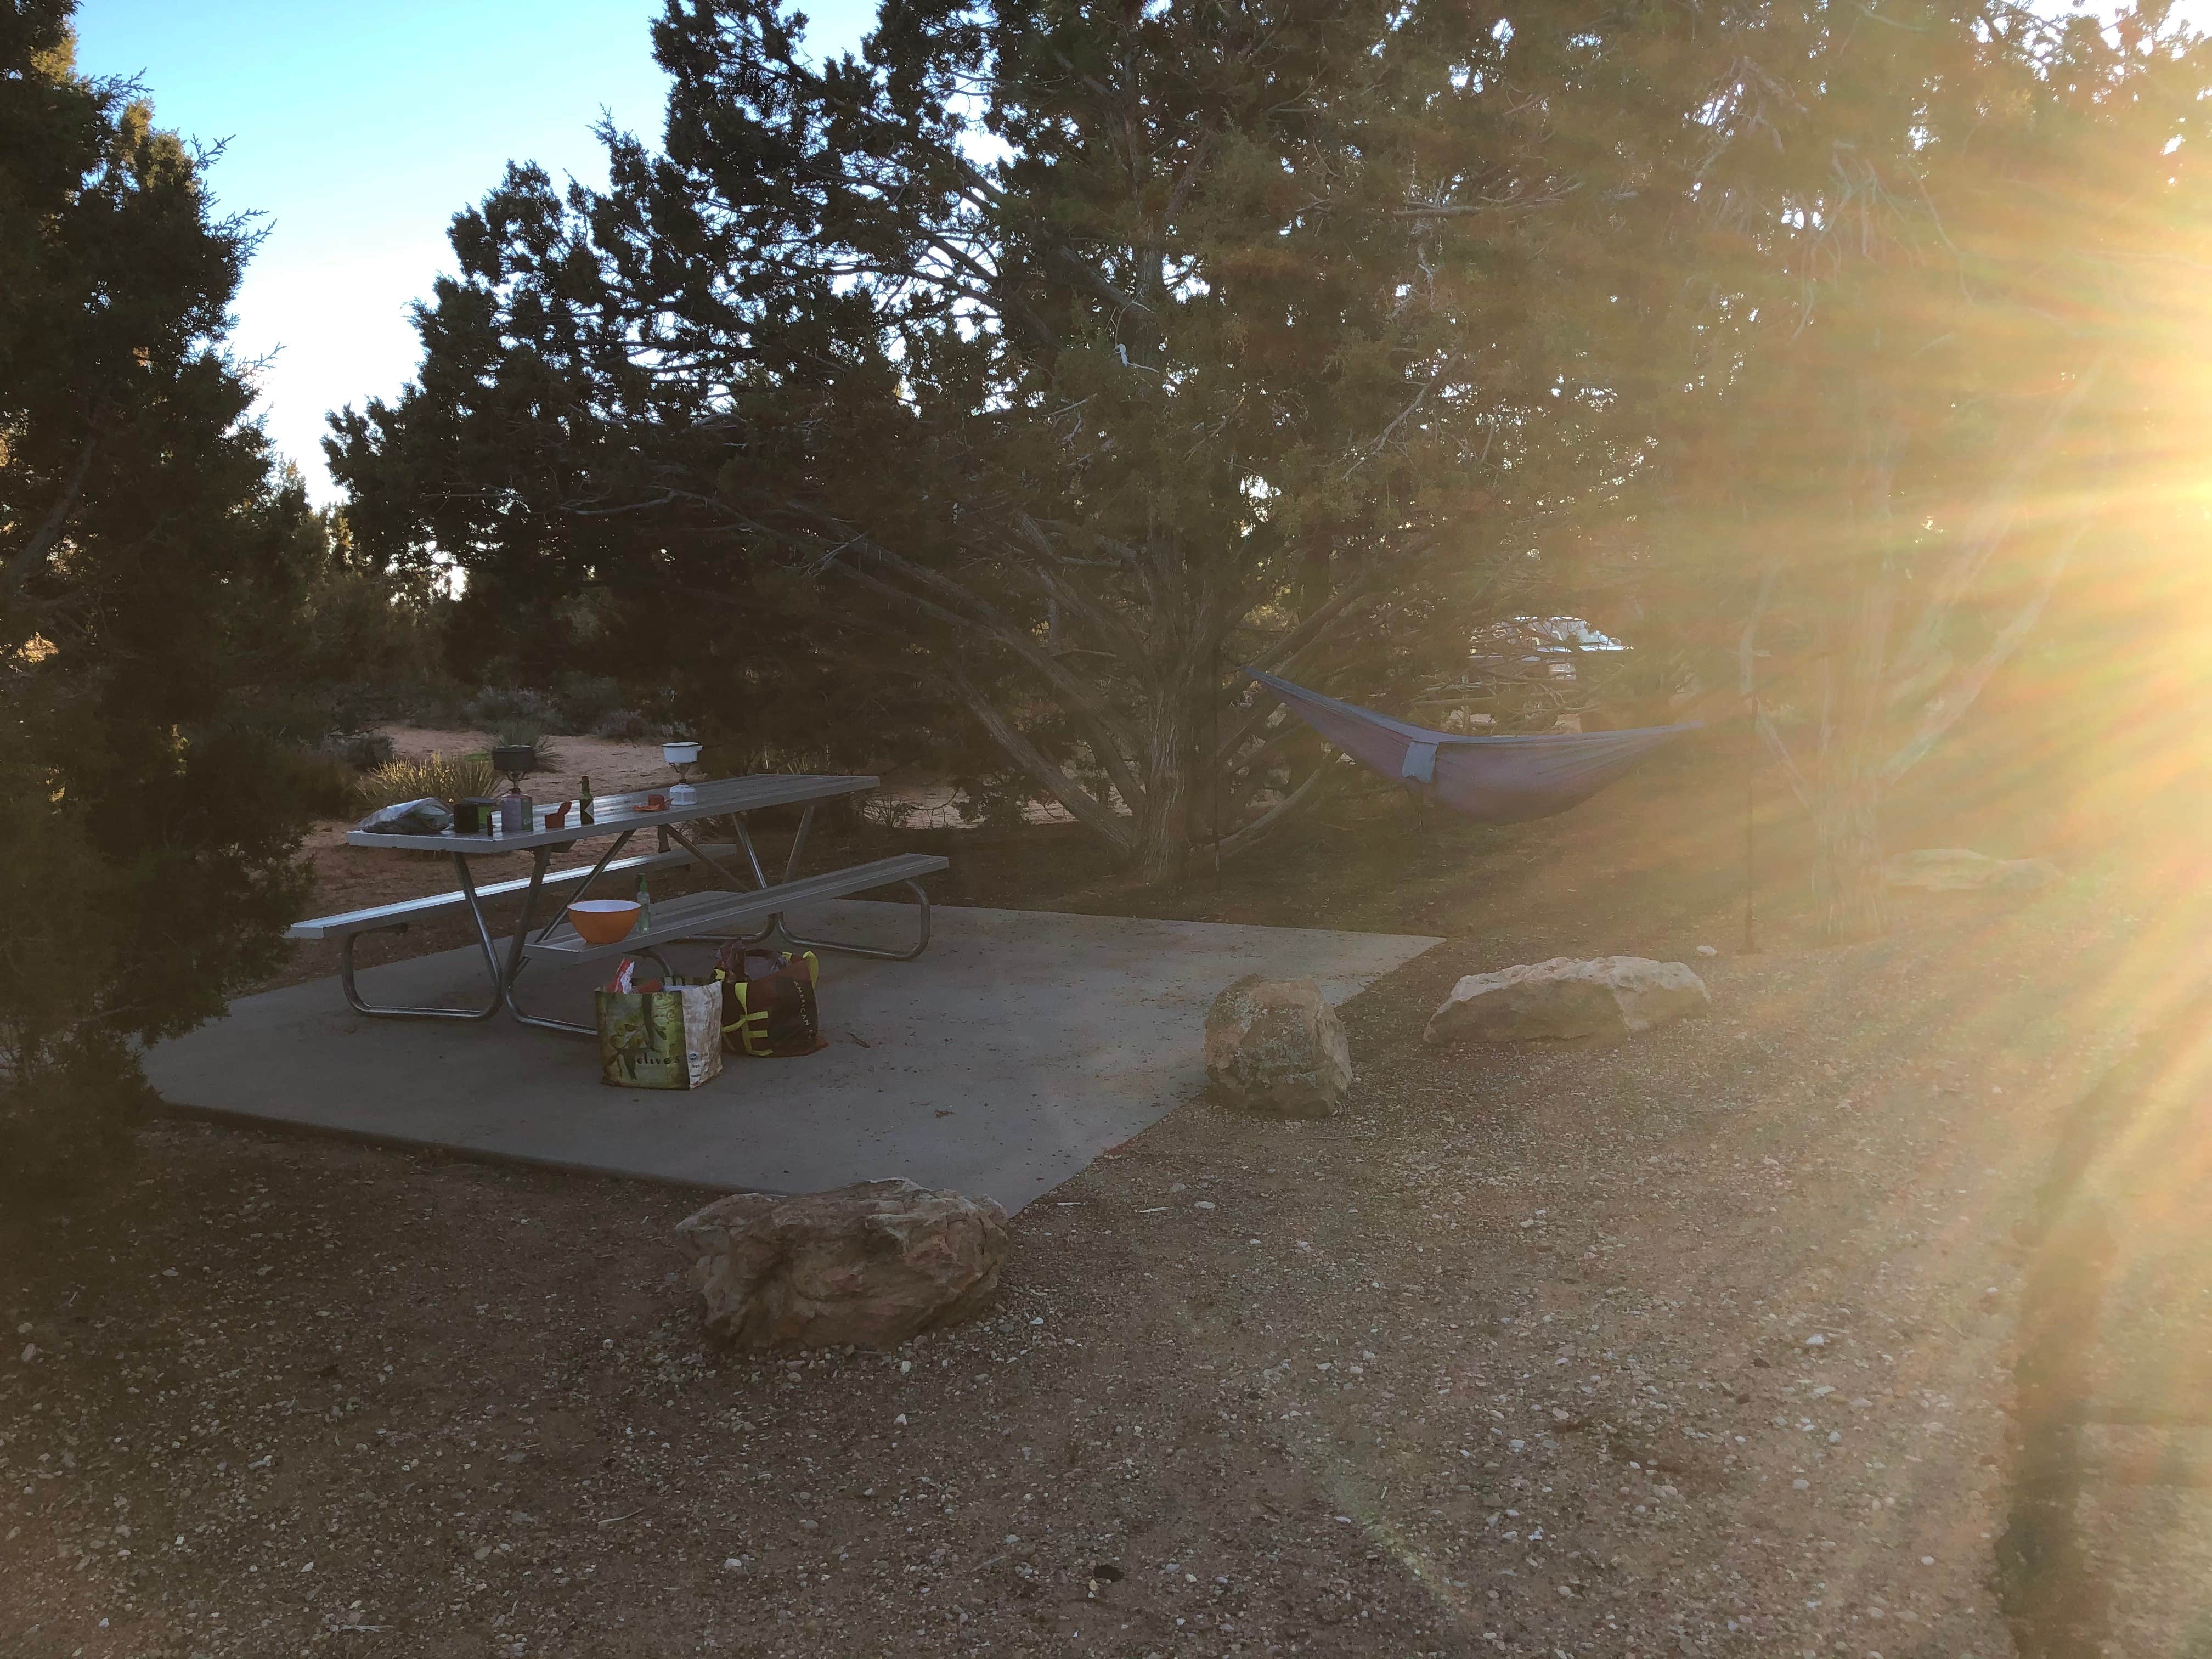 Camper submitted image from Coral Pink Sand Dunes State Park Campground - 5